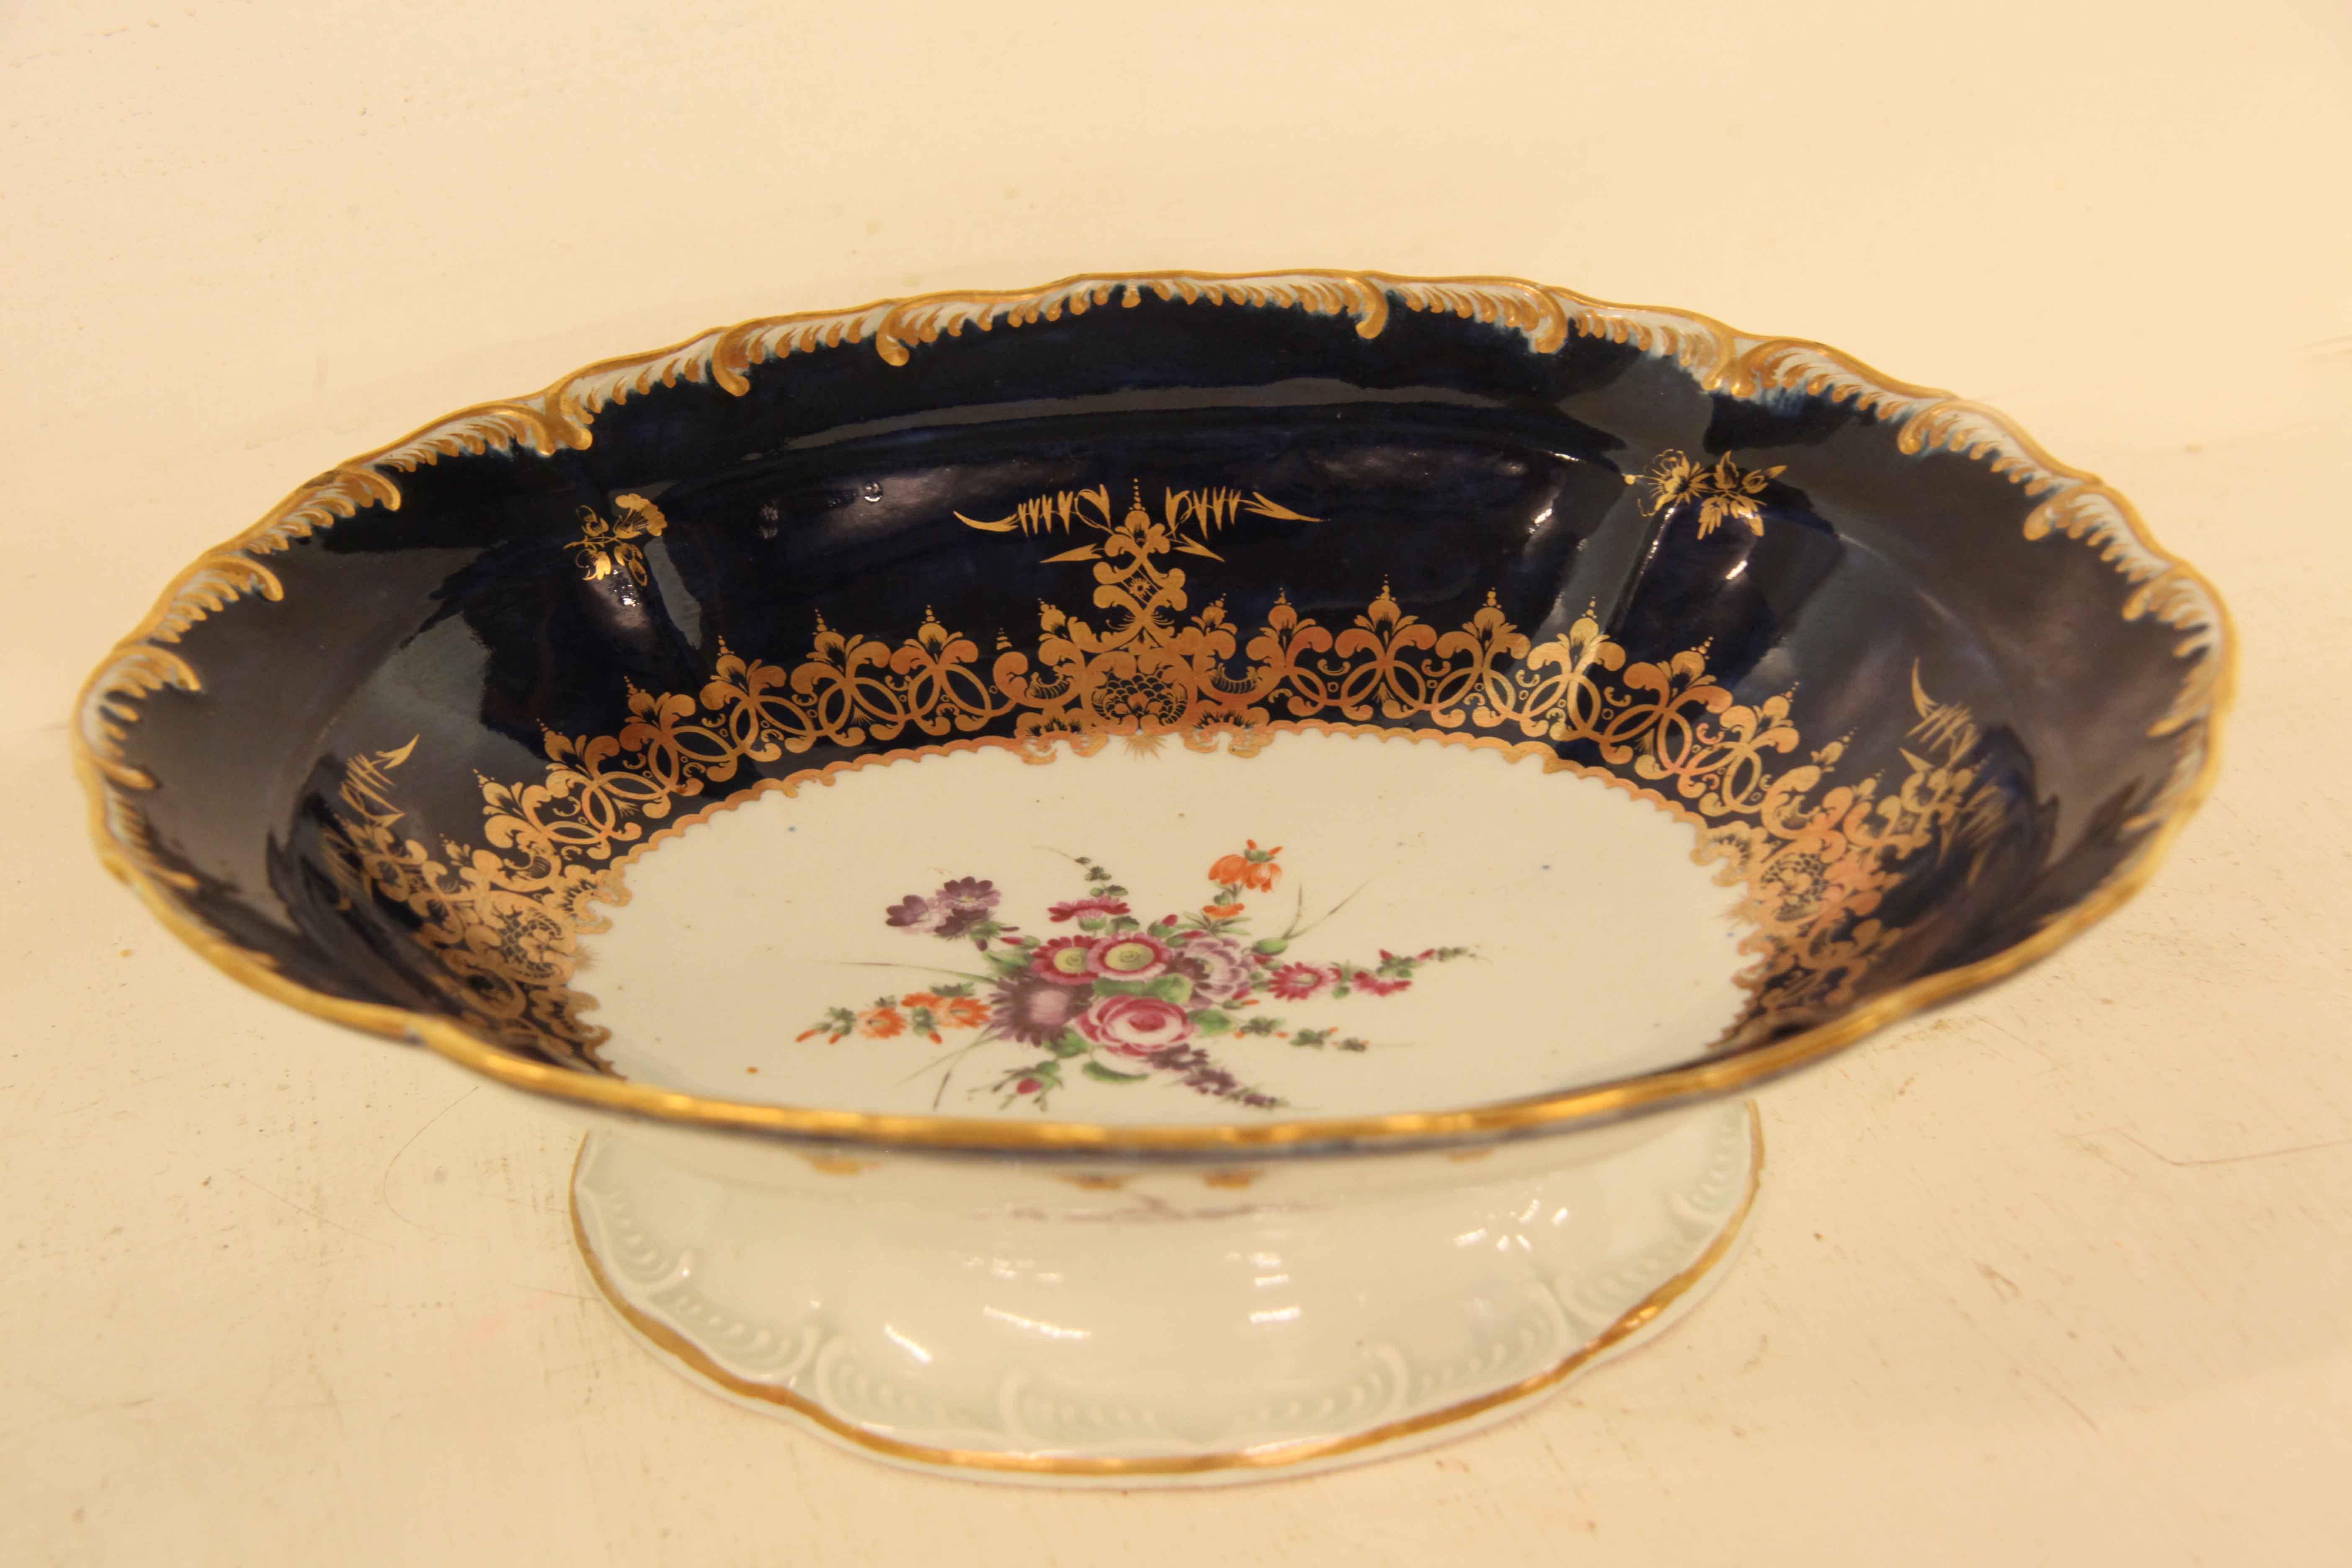 18th century Dr. Wall Worcester oval dish, the scalloped edge rim is beautifully gilt followed by a dark cobalt interior with gilding .  The open center features a bouquet of flowers in various colors and sizes.  The exterior has a cobalt and gilt